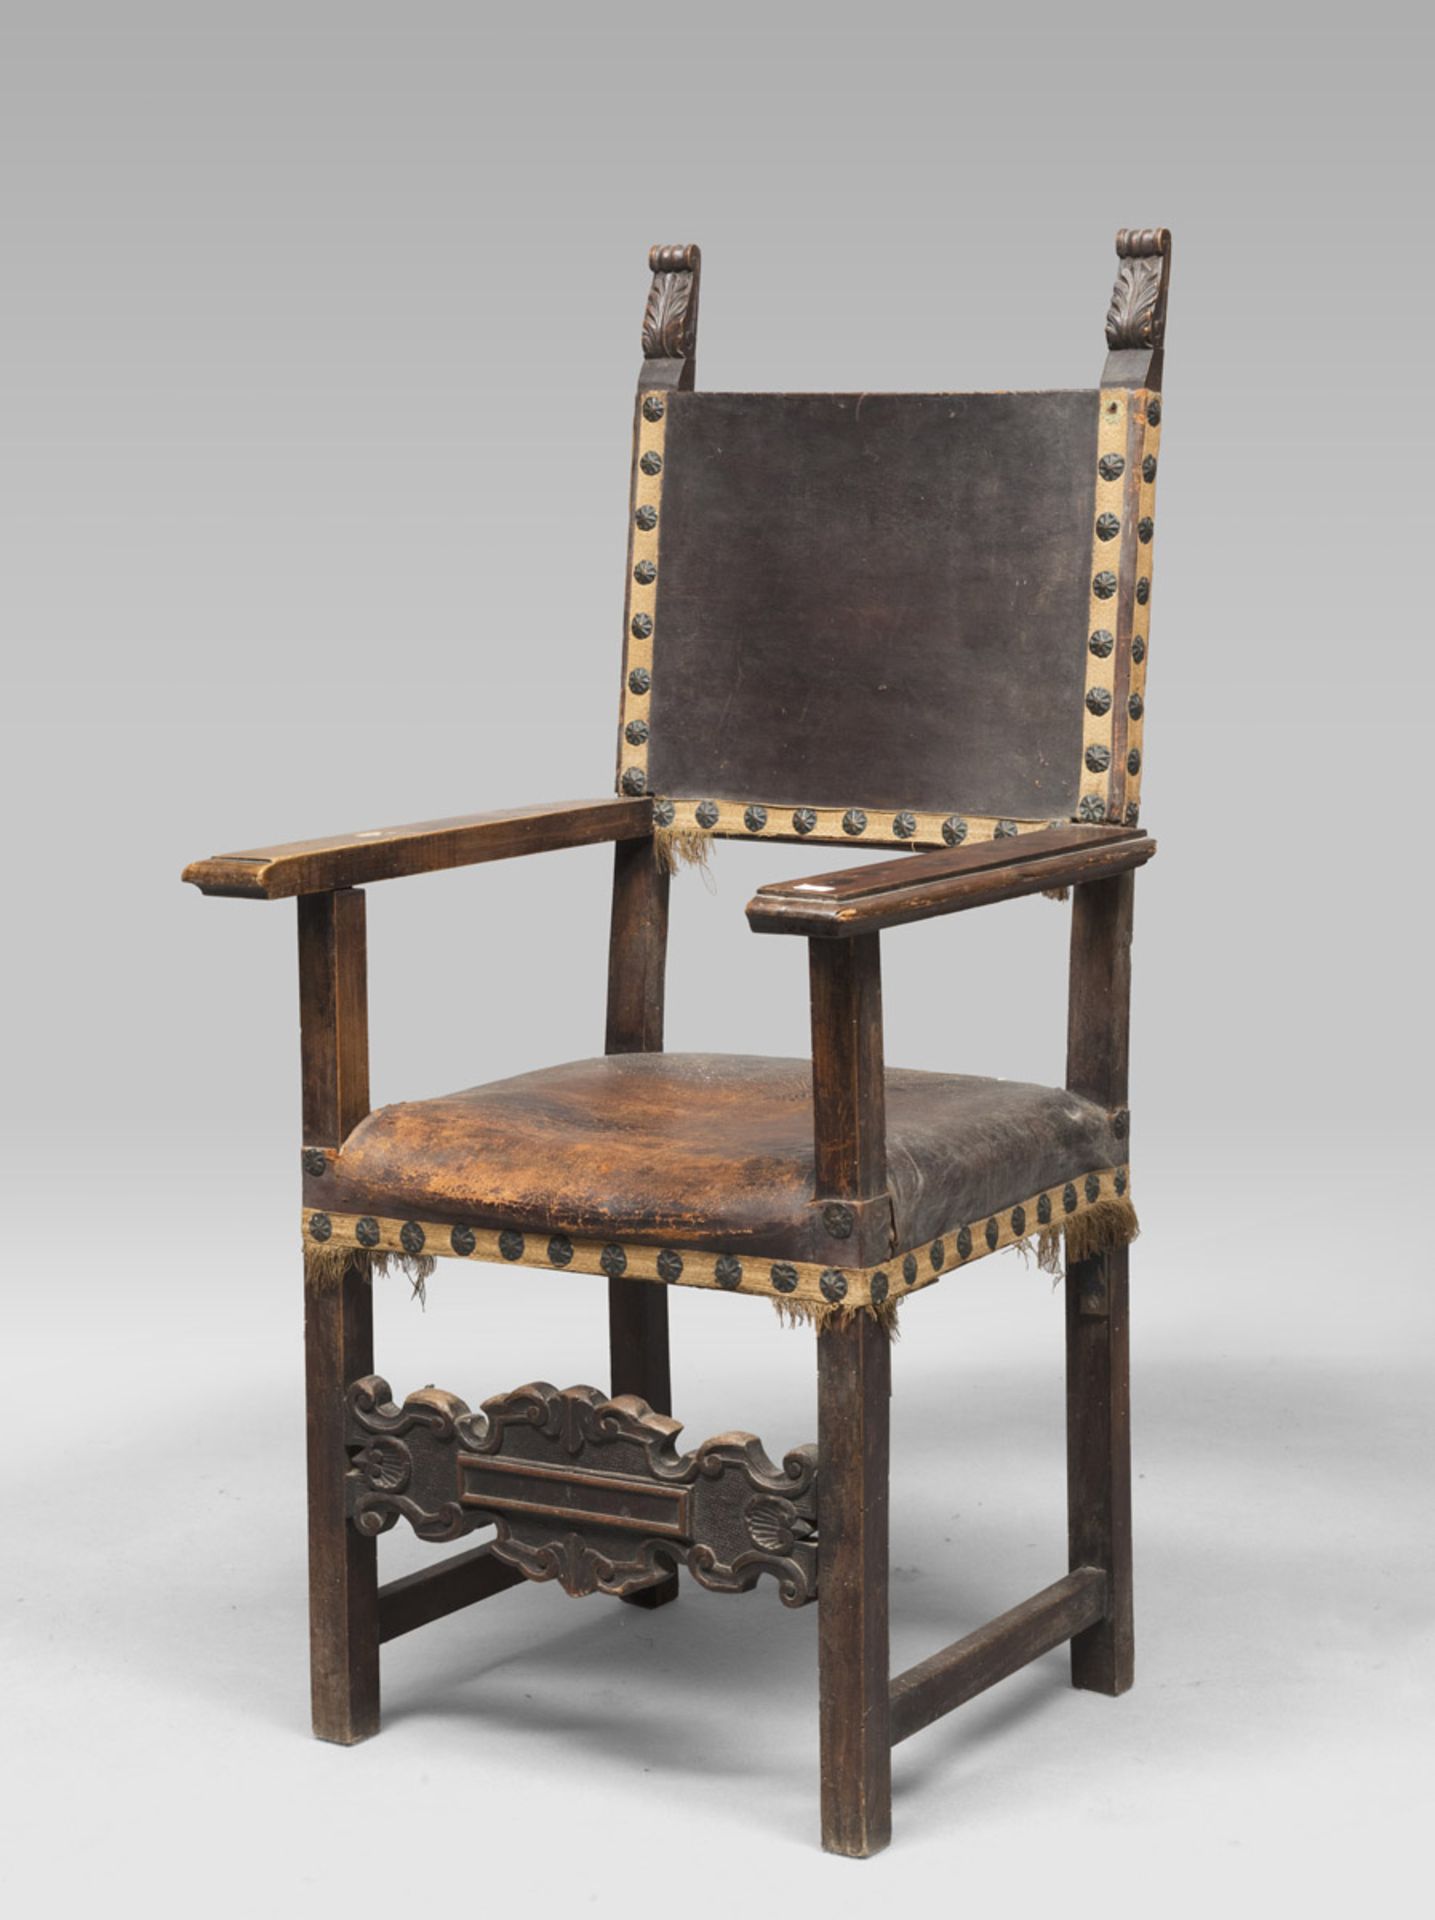 ARMCHAIR IN WALNUT, 19TH CENTURY of Renaissance taste, with rectangular back and flat arms.